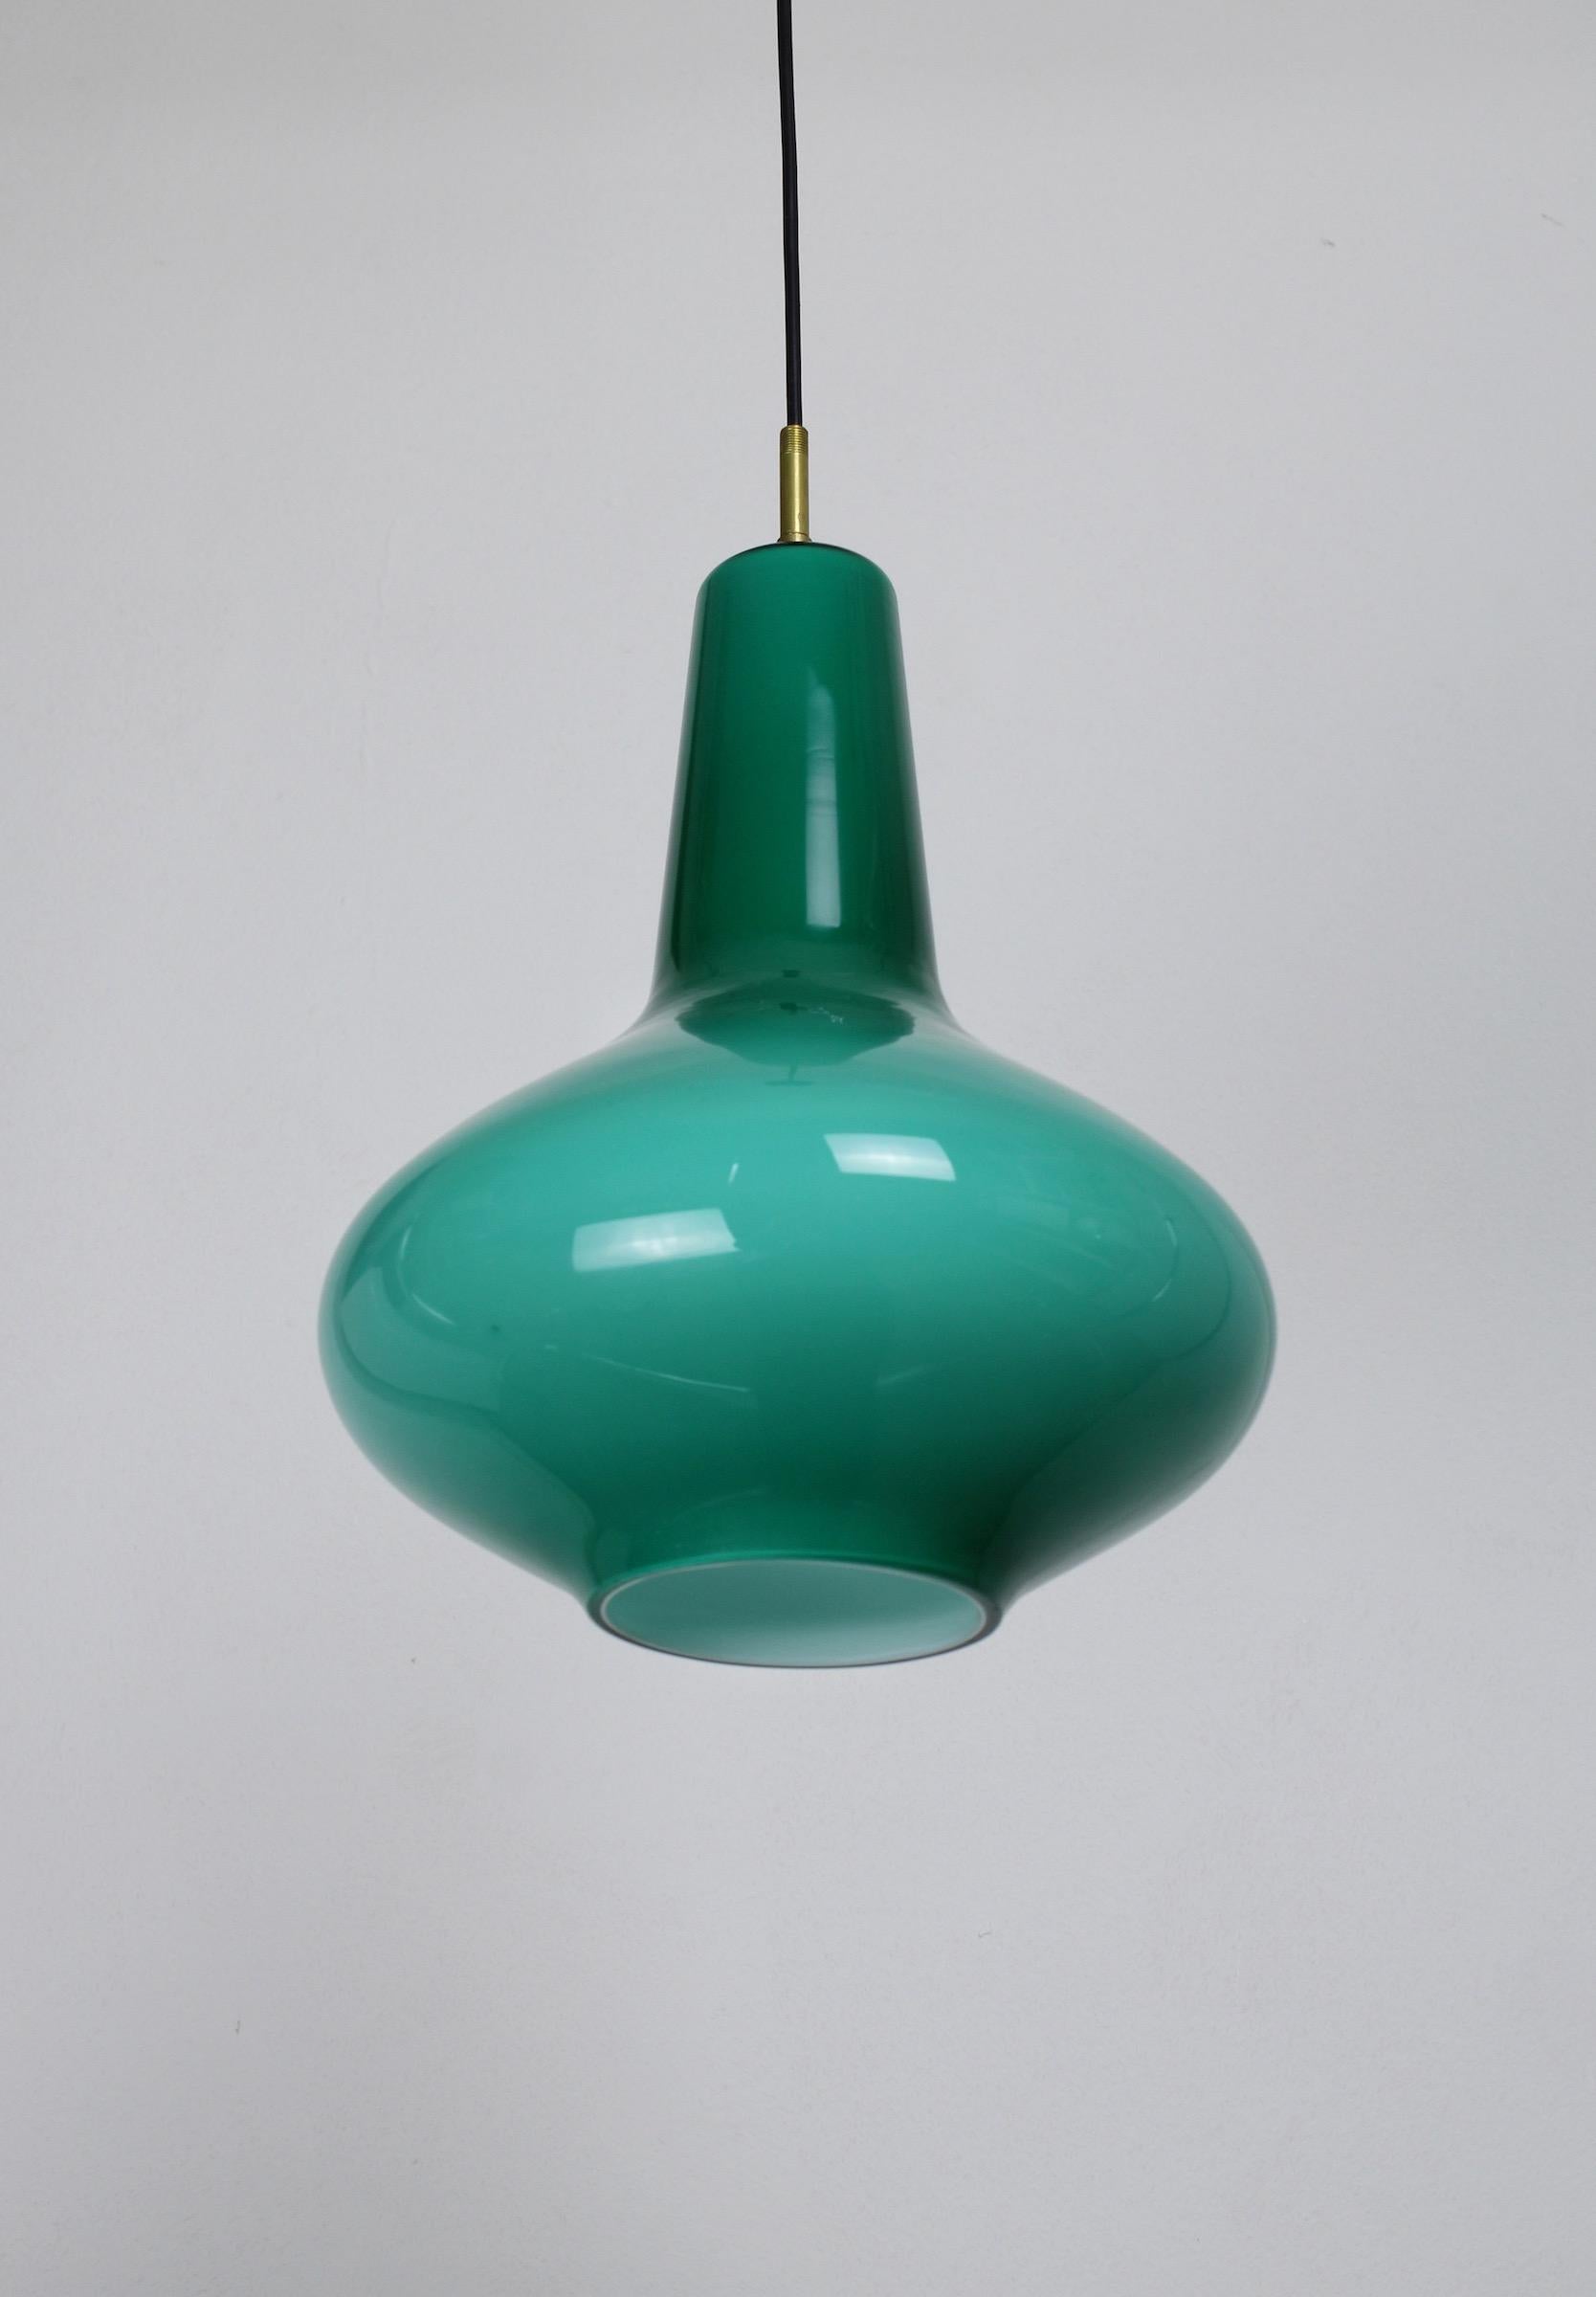 Stunning hand blown glass pendant lamp model No. 011.13. This lamp is designed by Massimo Vignelli at the start of his career in design.
This lamp is made by Murano glass specialist Venini in the 1950s. One of the most special lamps that Vignelli